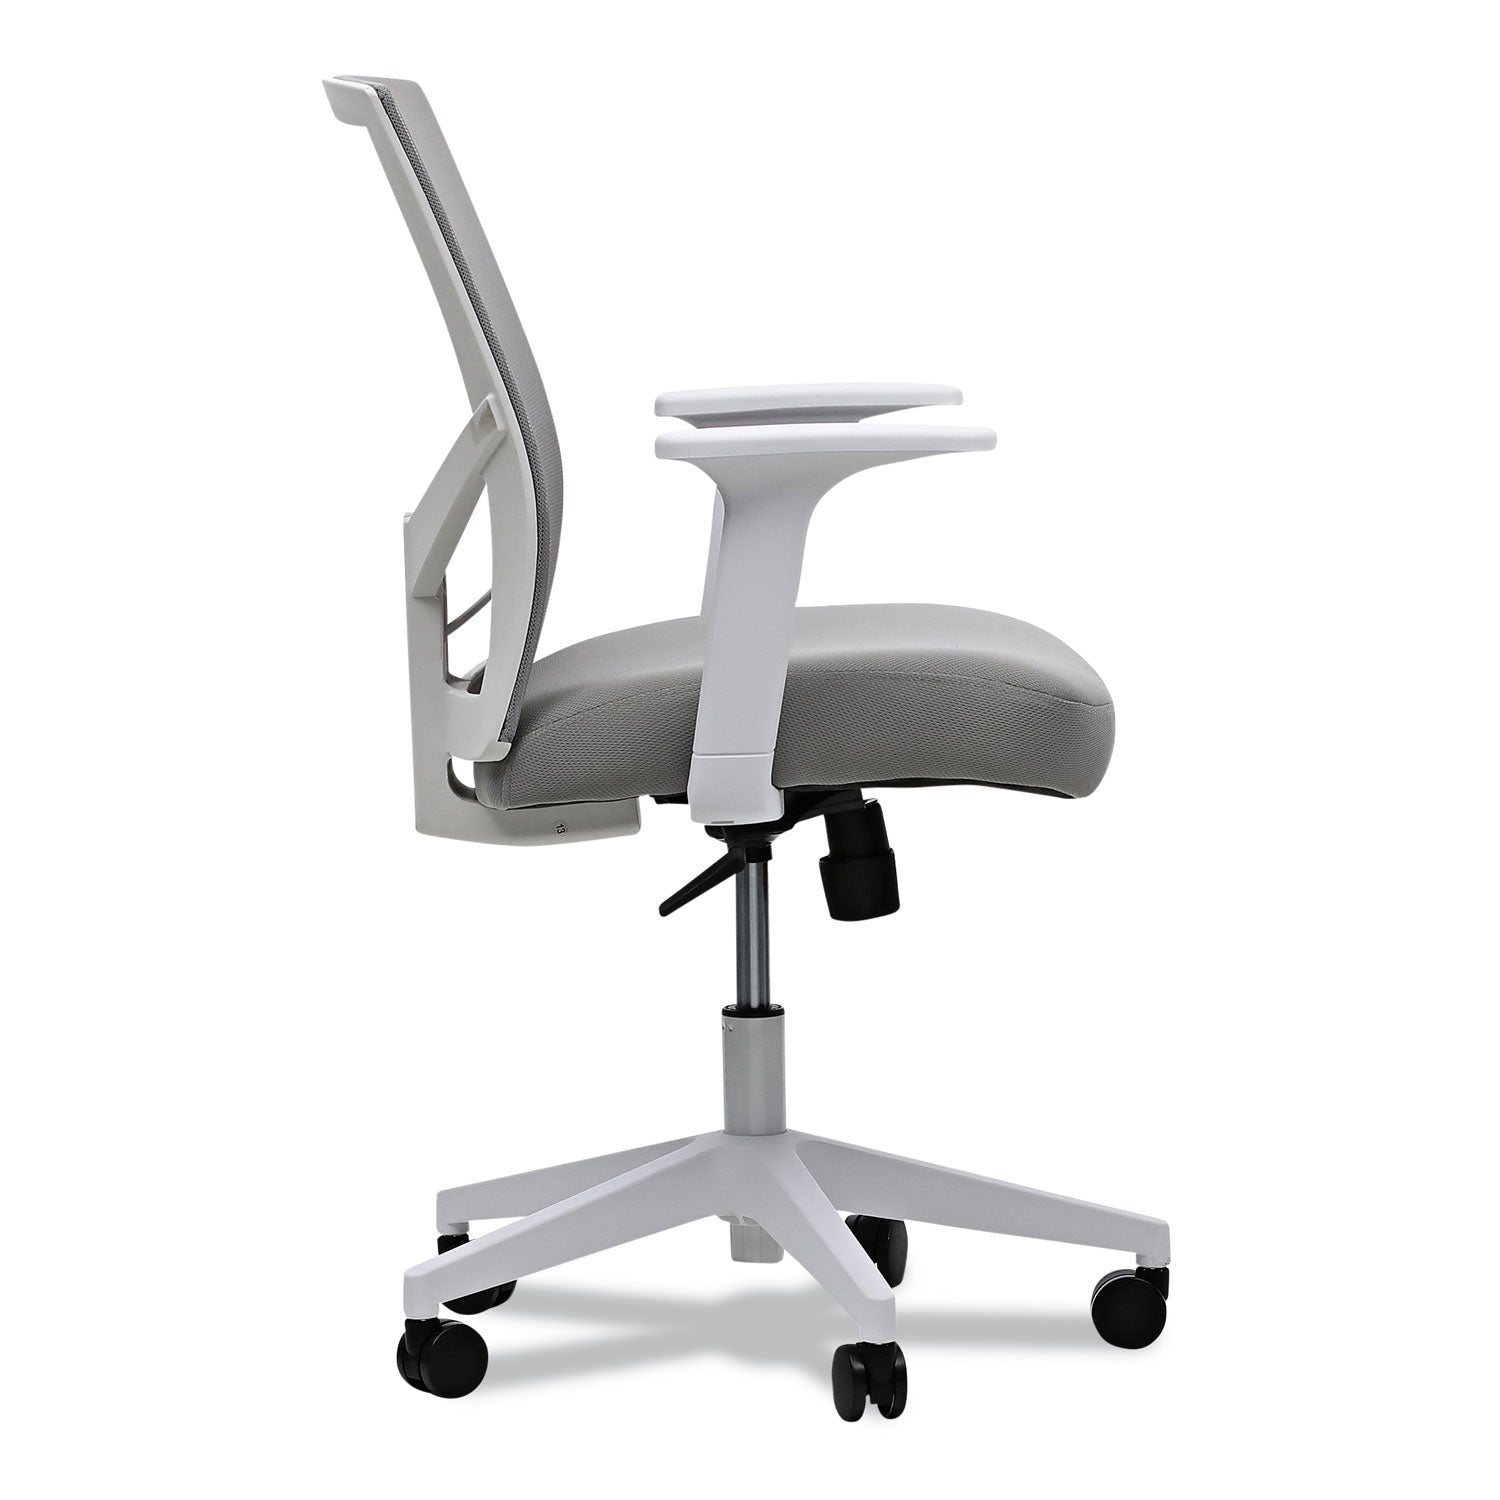 mesh-back-fabric-task-chair-supports-up-to-275-lb-1732-to-211-seat-height-gray-seat-gray-back_alews42b47 - 8